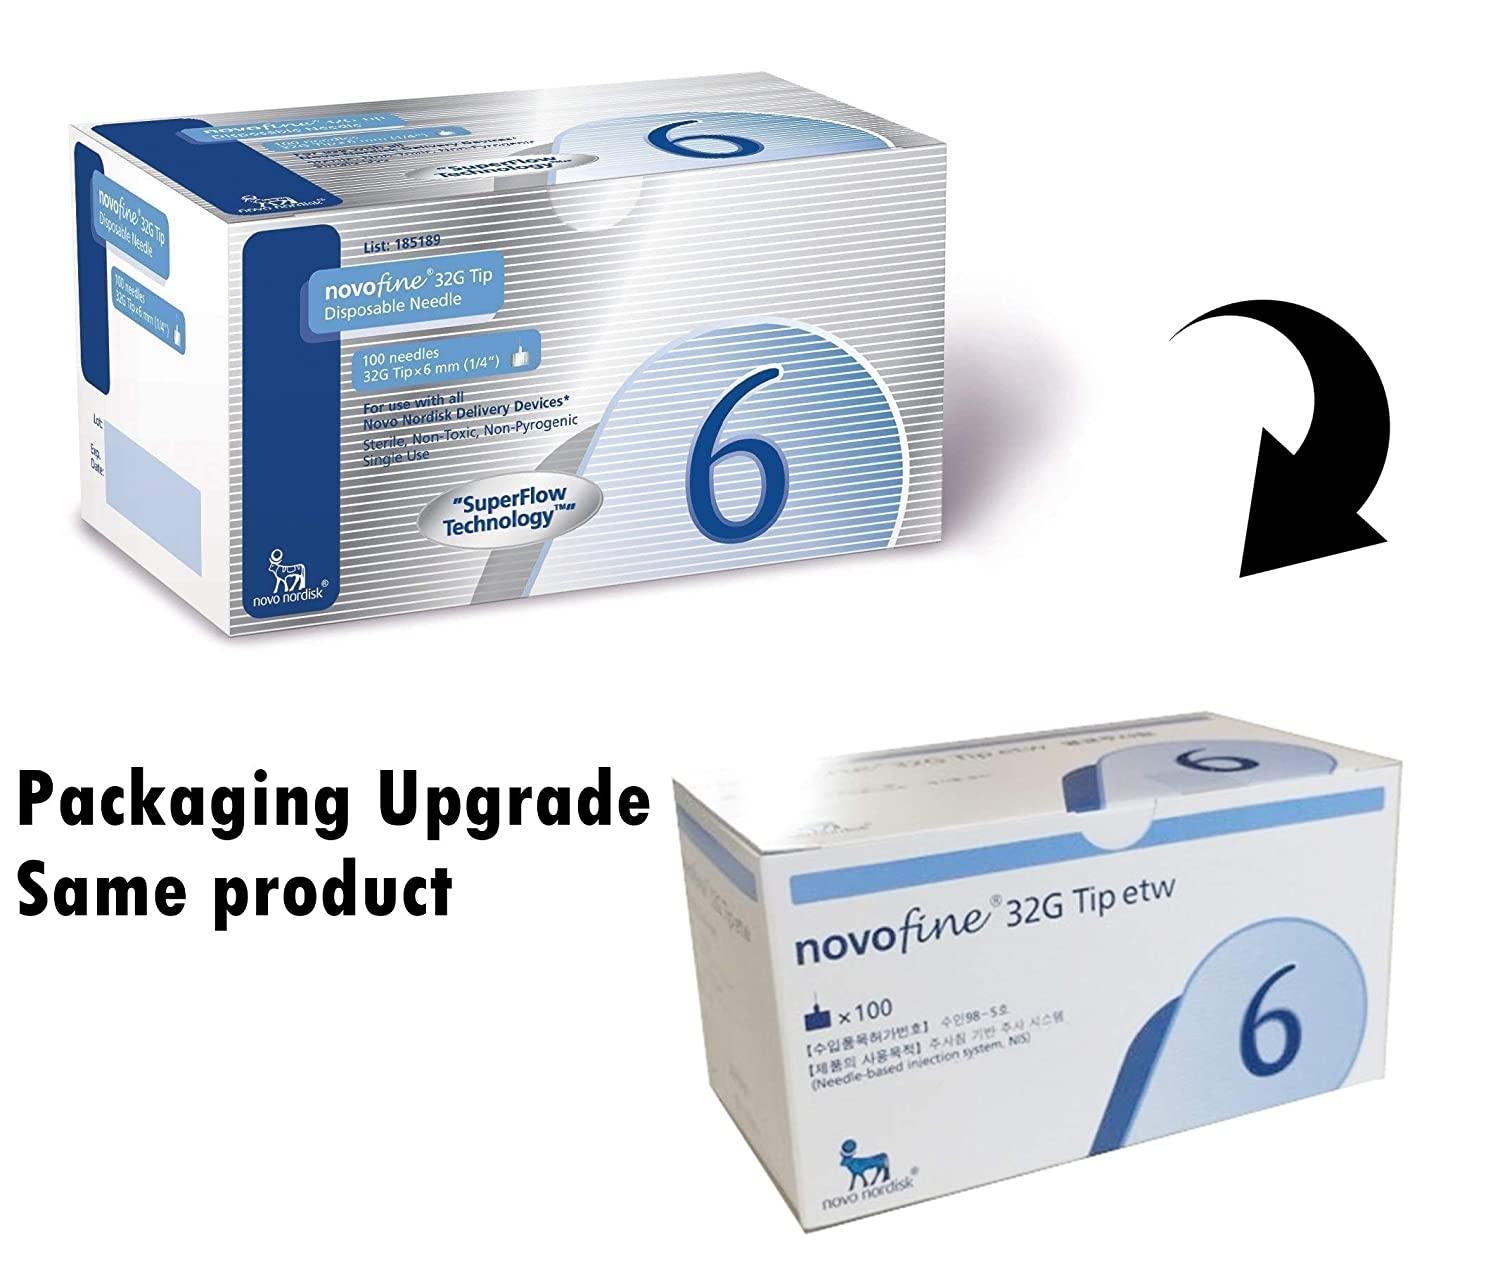 Qoo10 - Novofine Insulin Needles *Box of 100s *Available in sizes: 4mm(32G) 6mm : Home Electronics